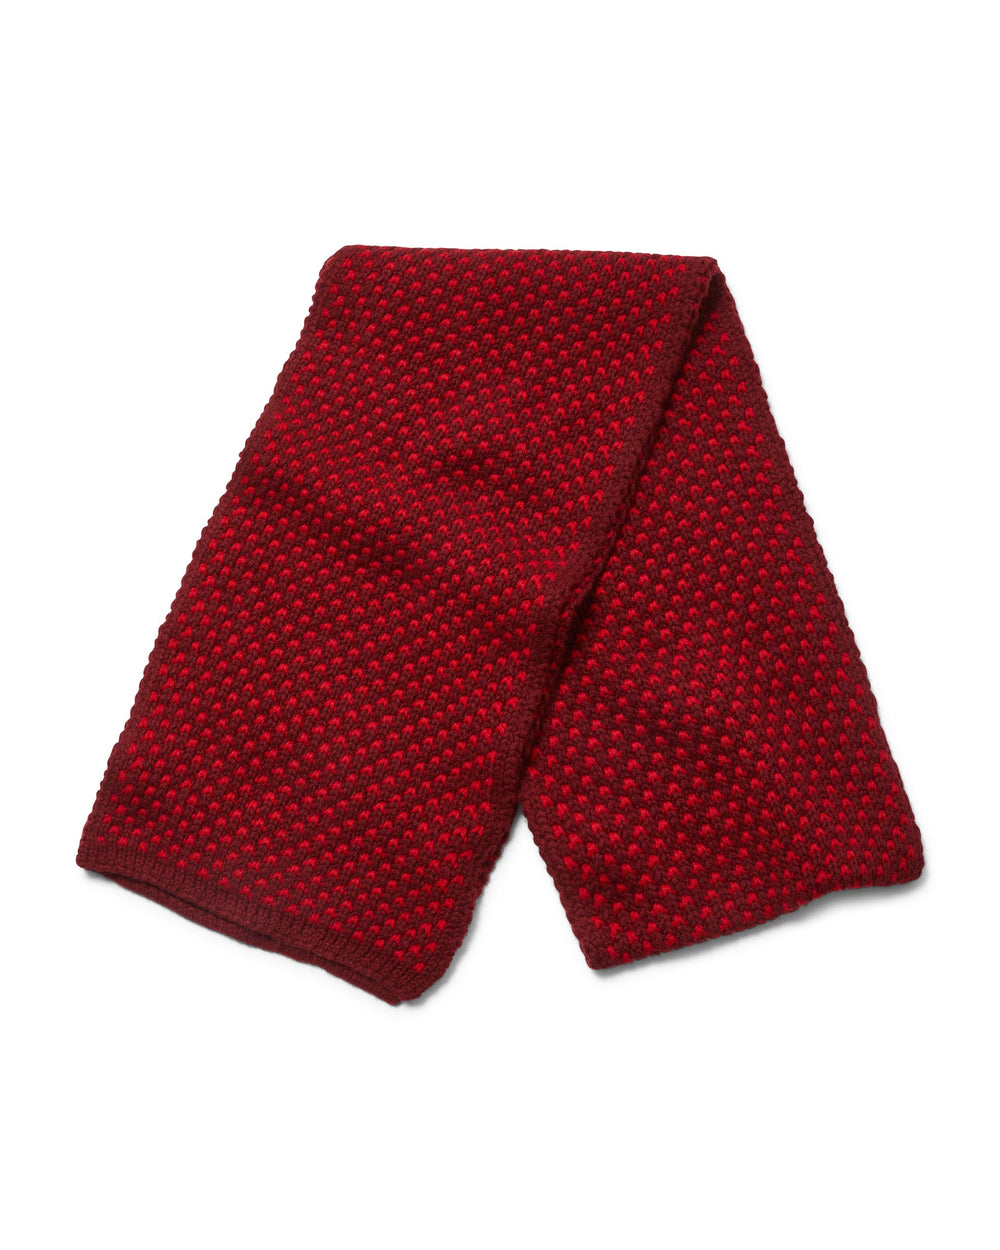 London Scarf in Cashmere, Red & Burgundy